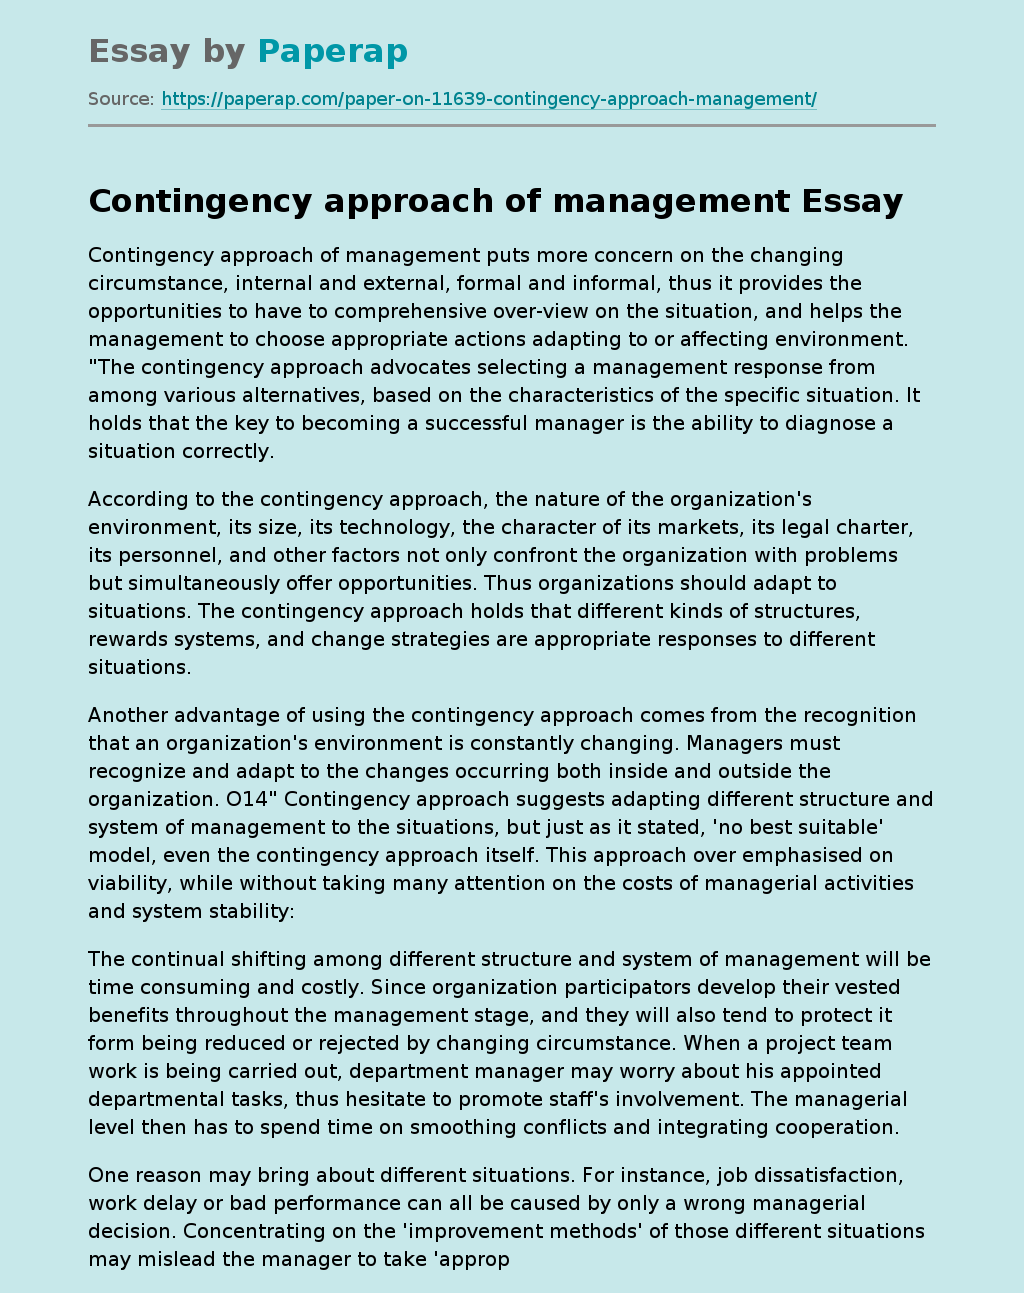 Contingency approach of management